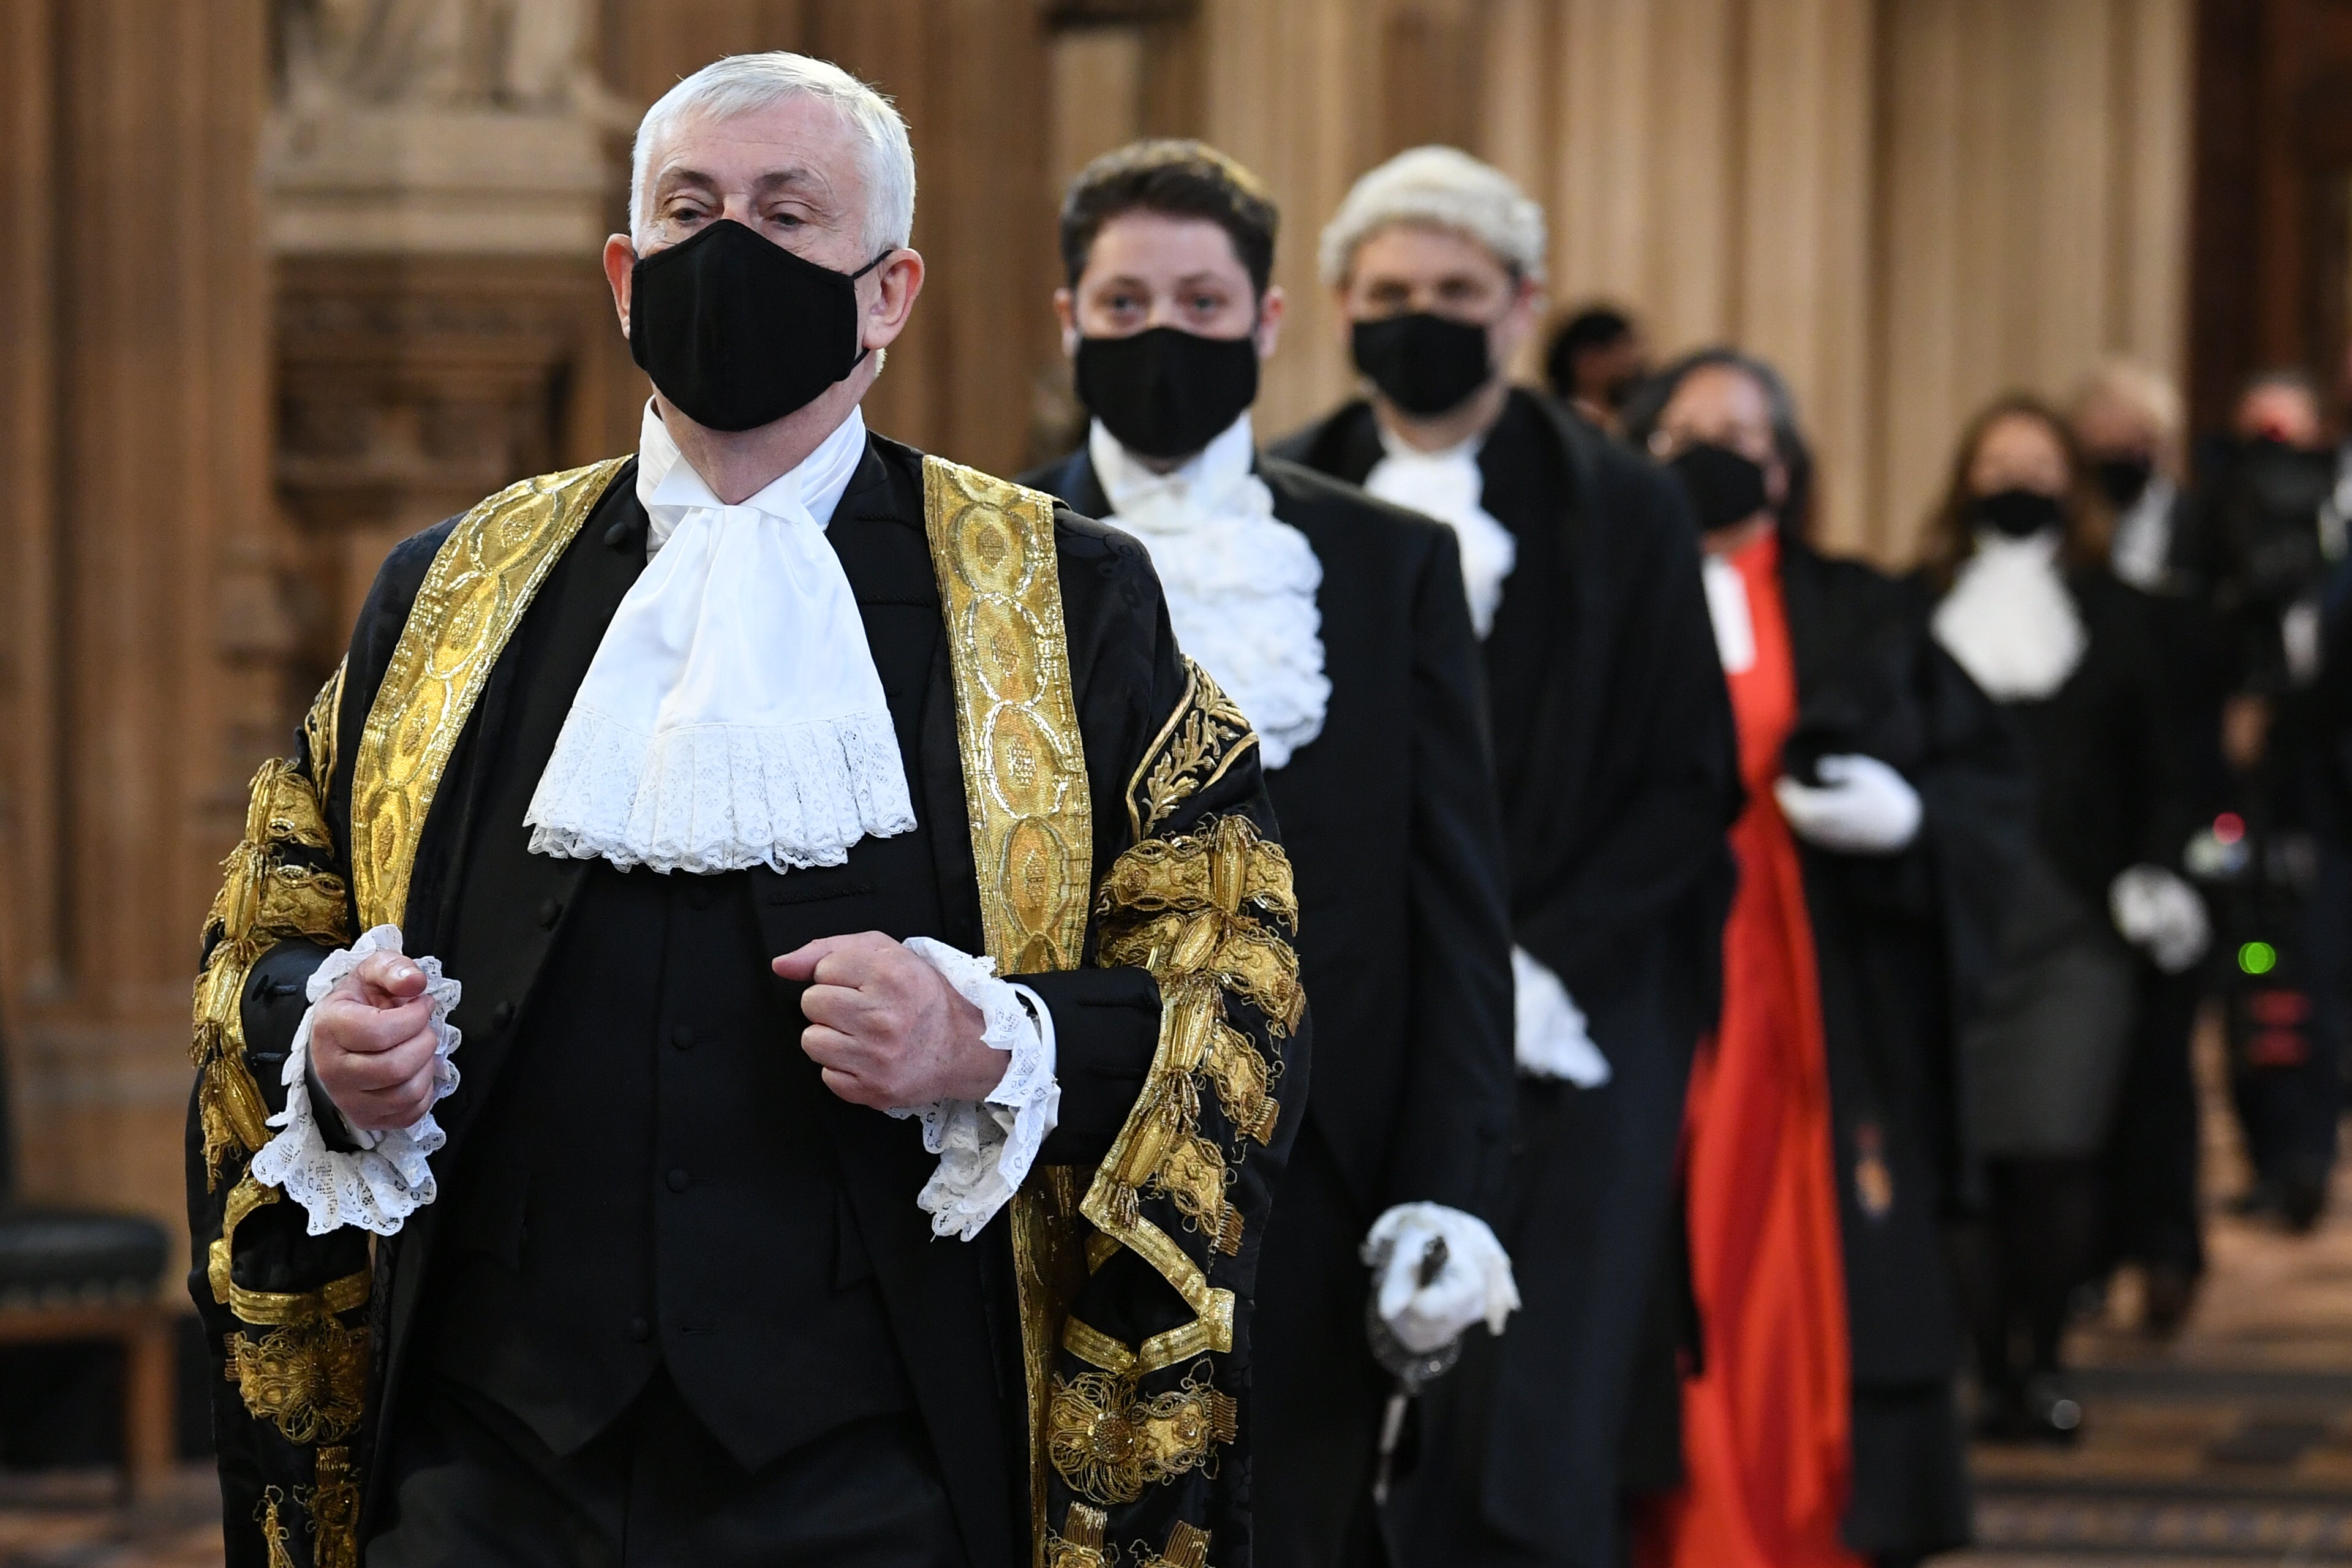 Sir Lindsay Hoyle has previously reprimanded MPs for their appearance